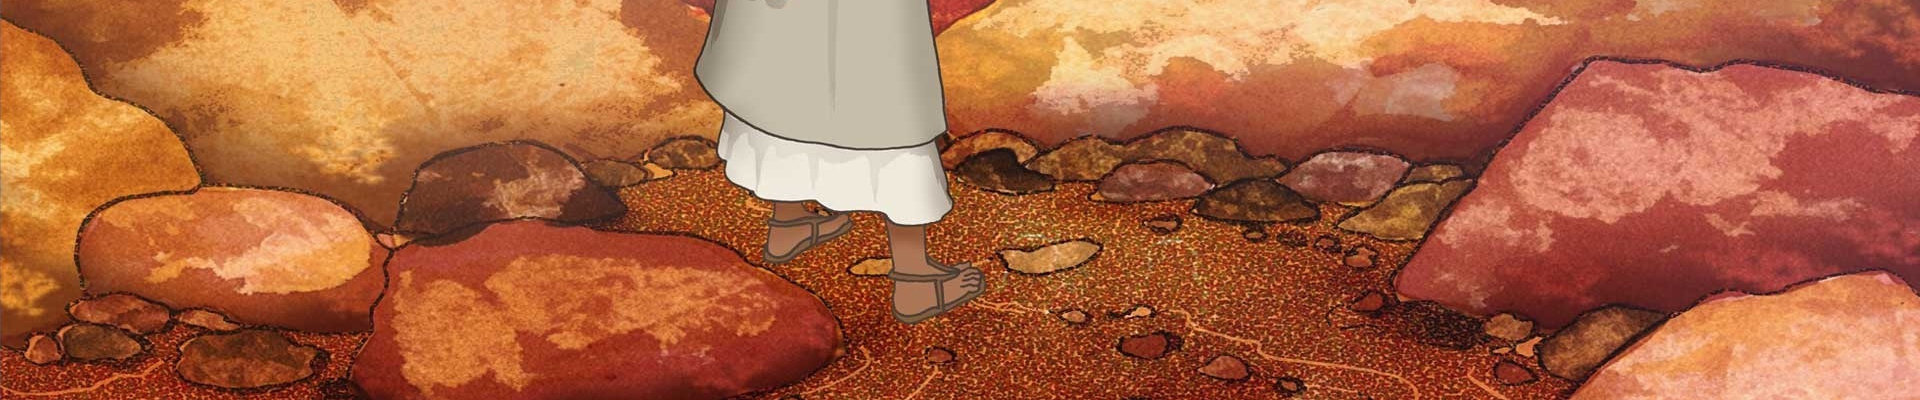 Illustration showing the feet of Christ in the wilderness